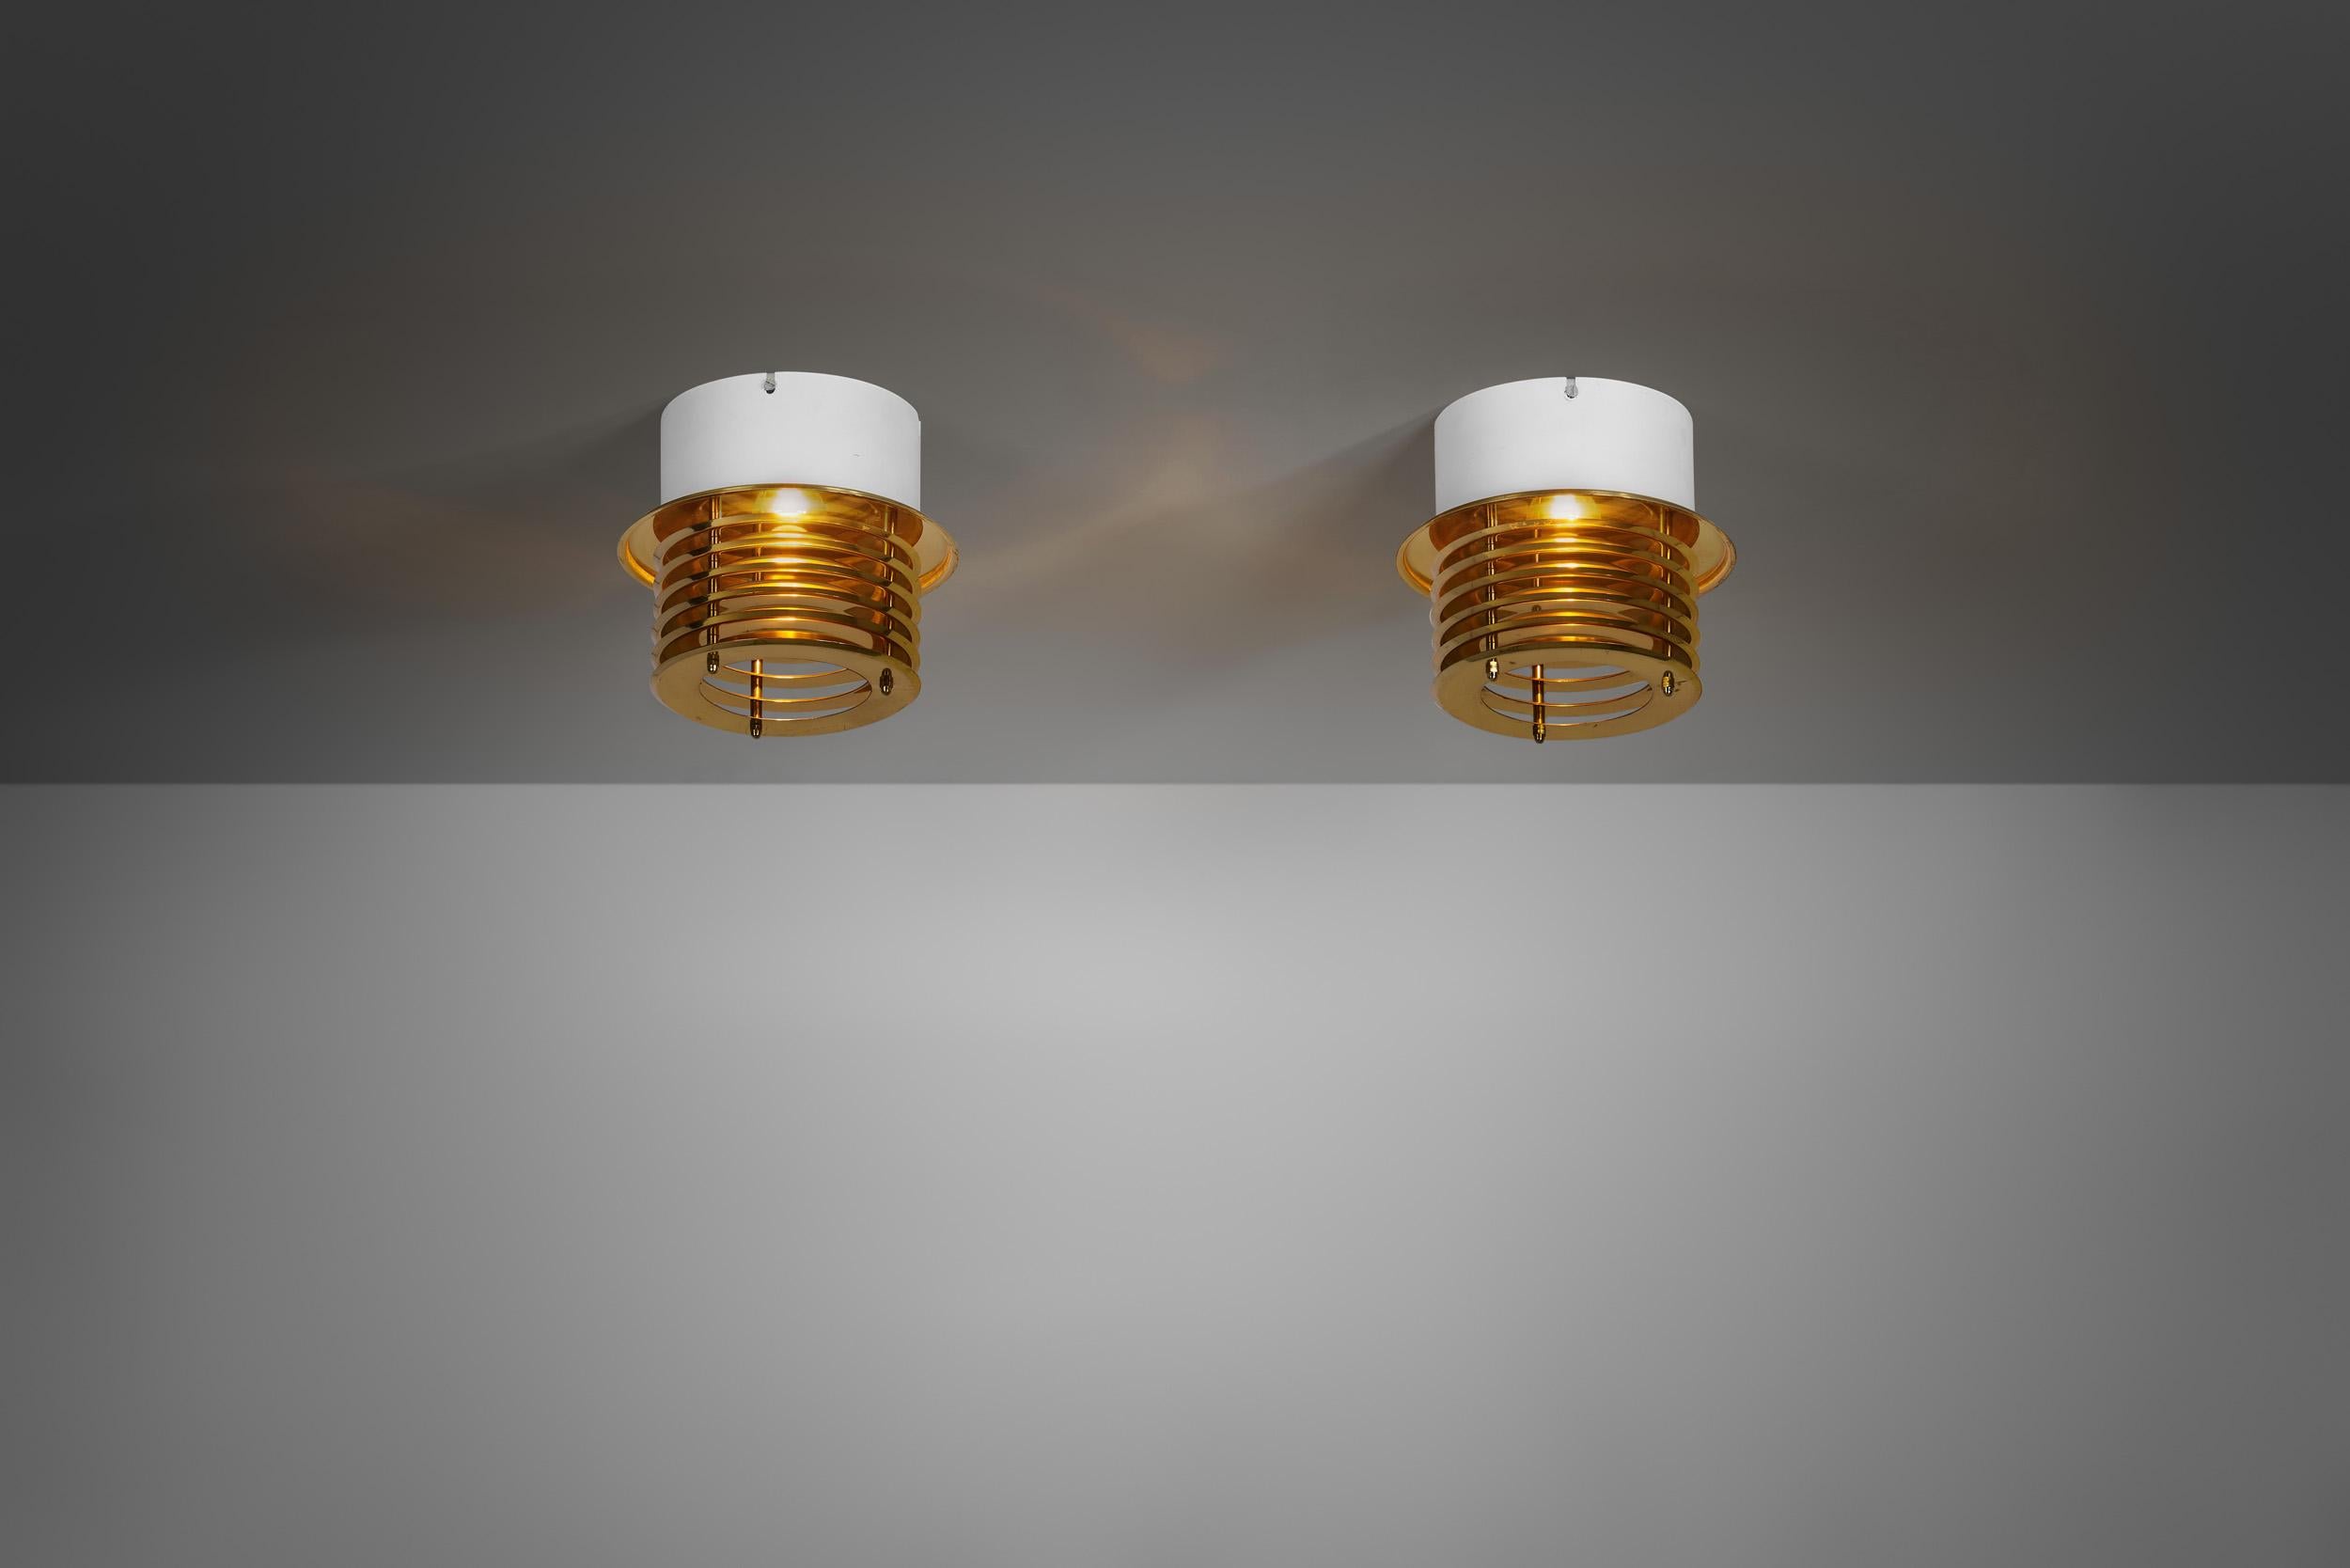 Brass and Metal Ceiling Lamps by Taiba-Falkenberg Belysnin, Sweden 1960s In Good Condition For Sale In Utrecht, NL